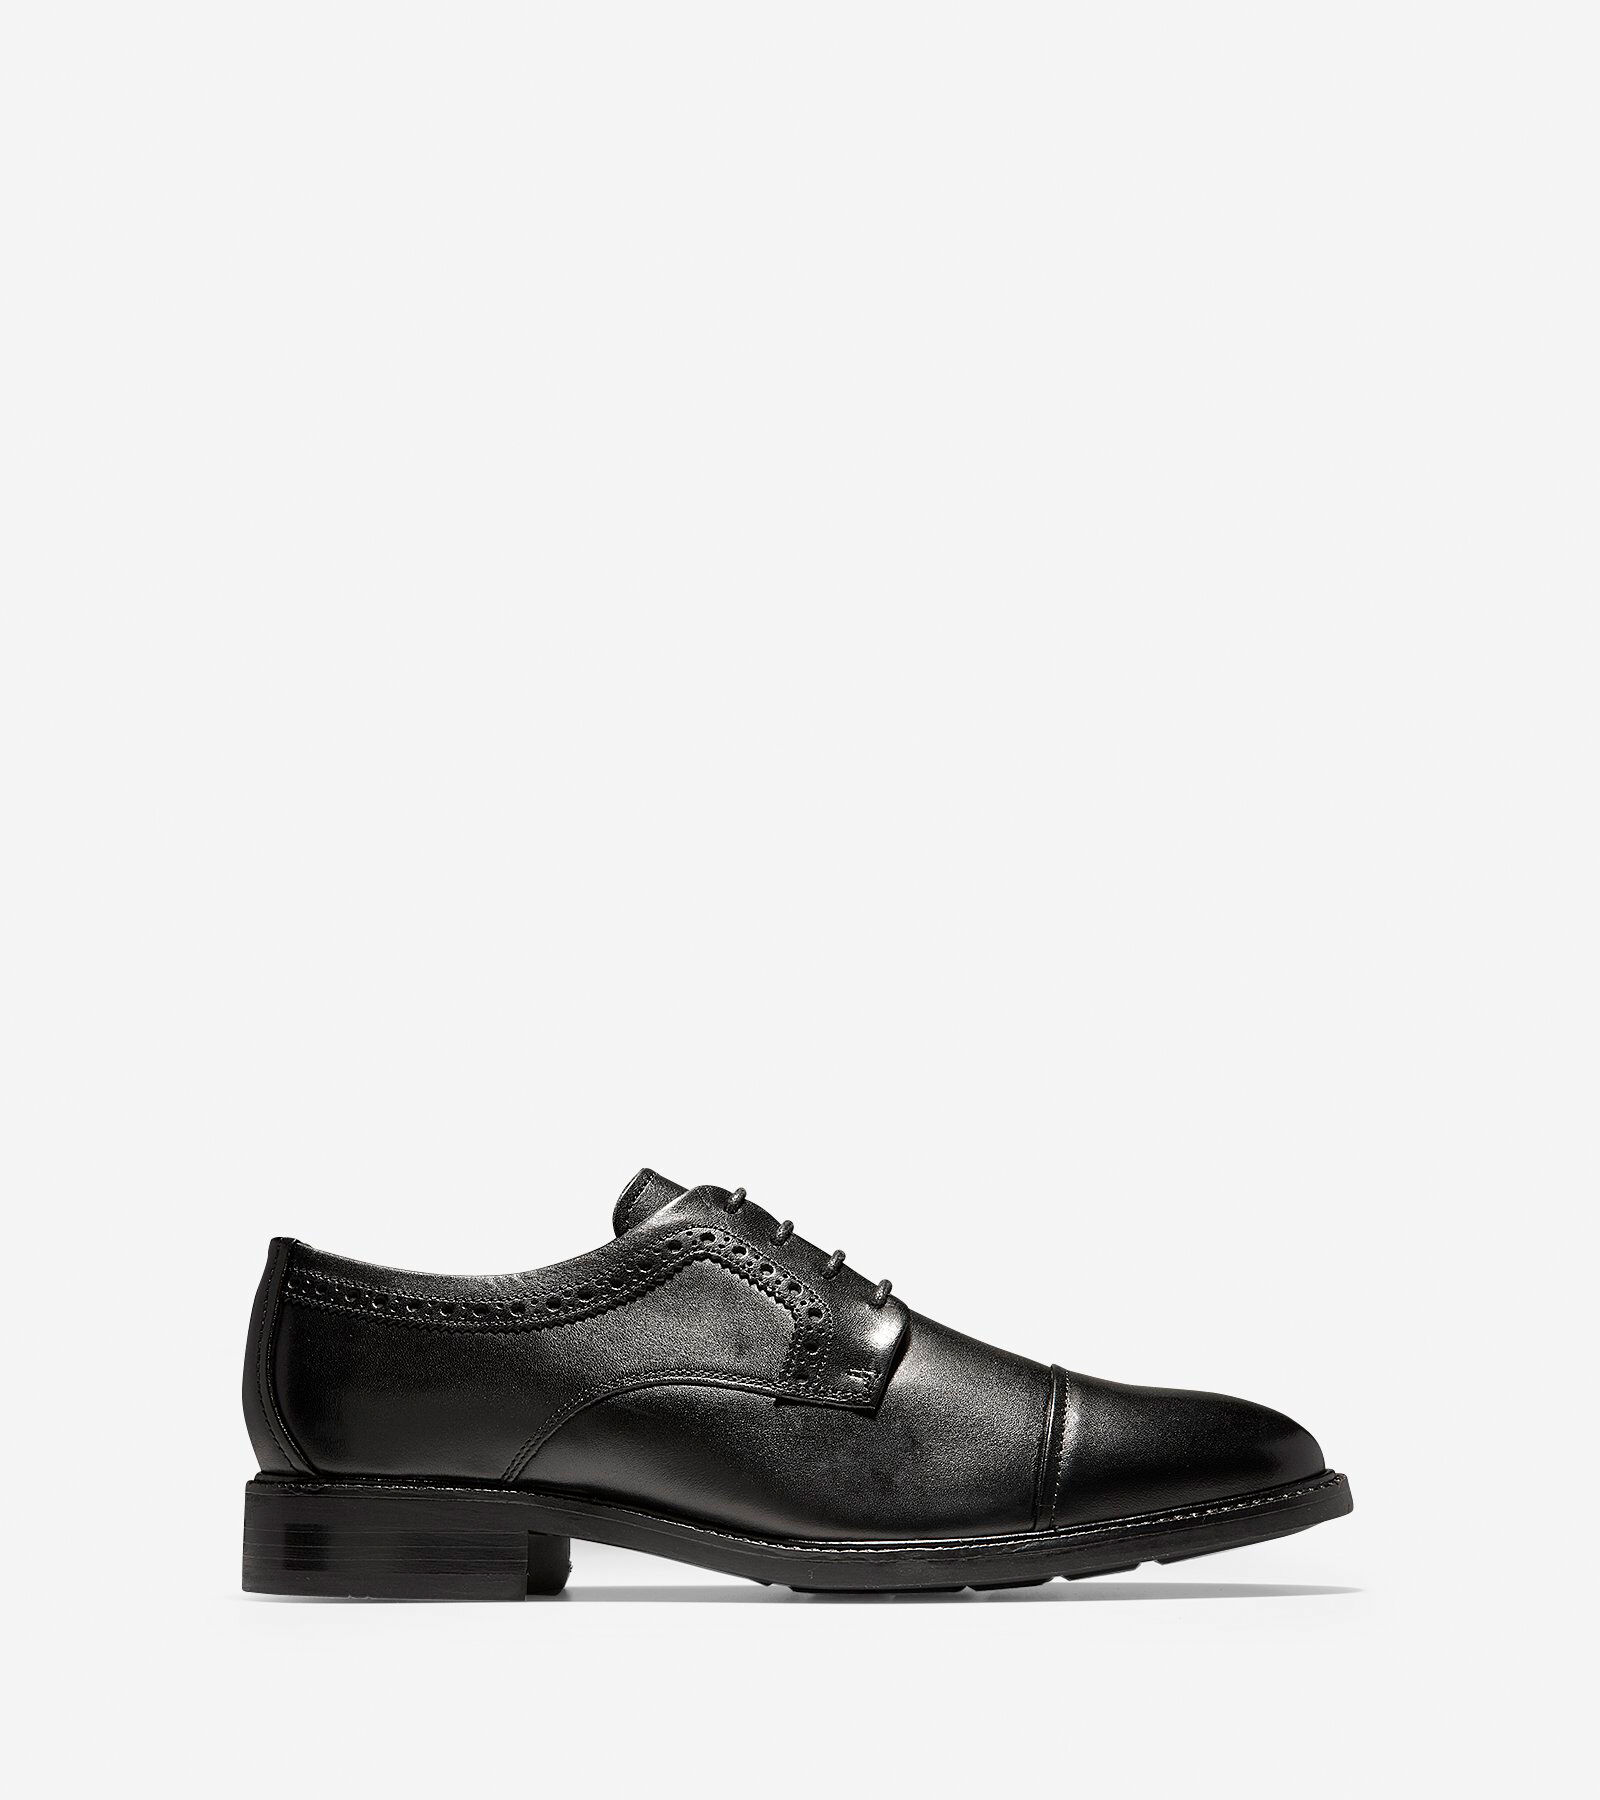 cole haan shoes sale clearance